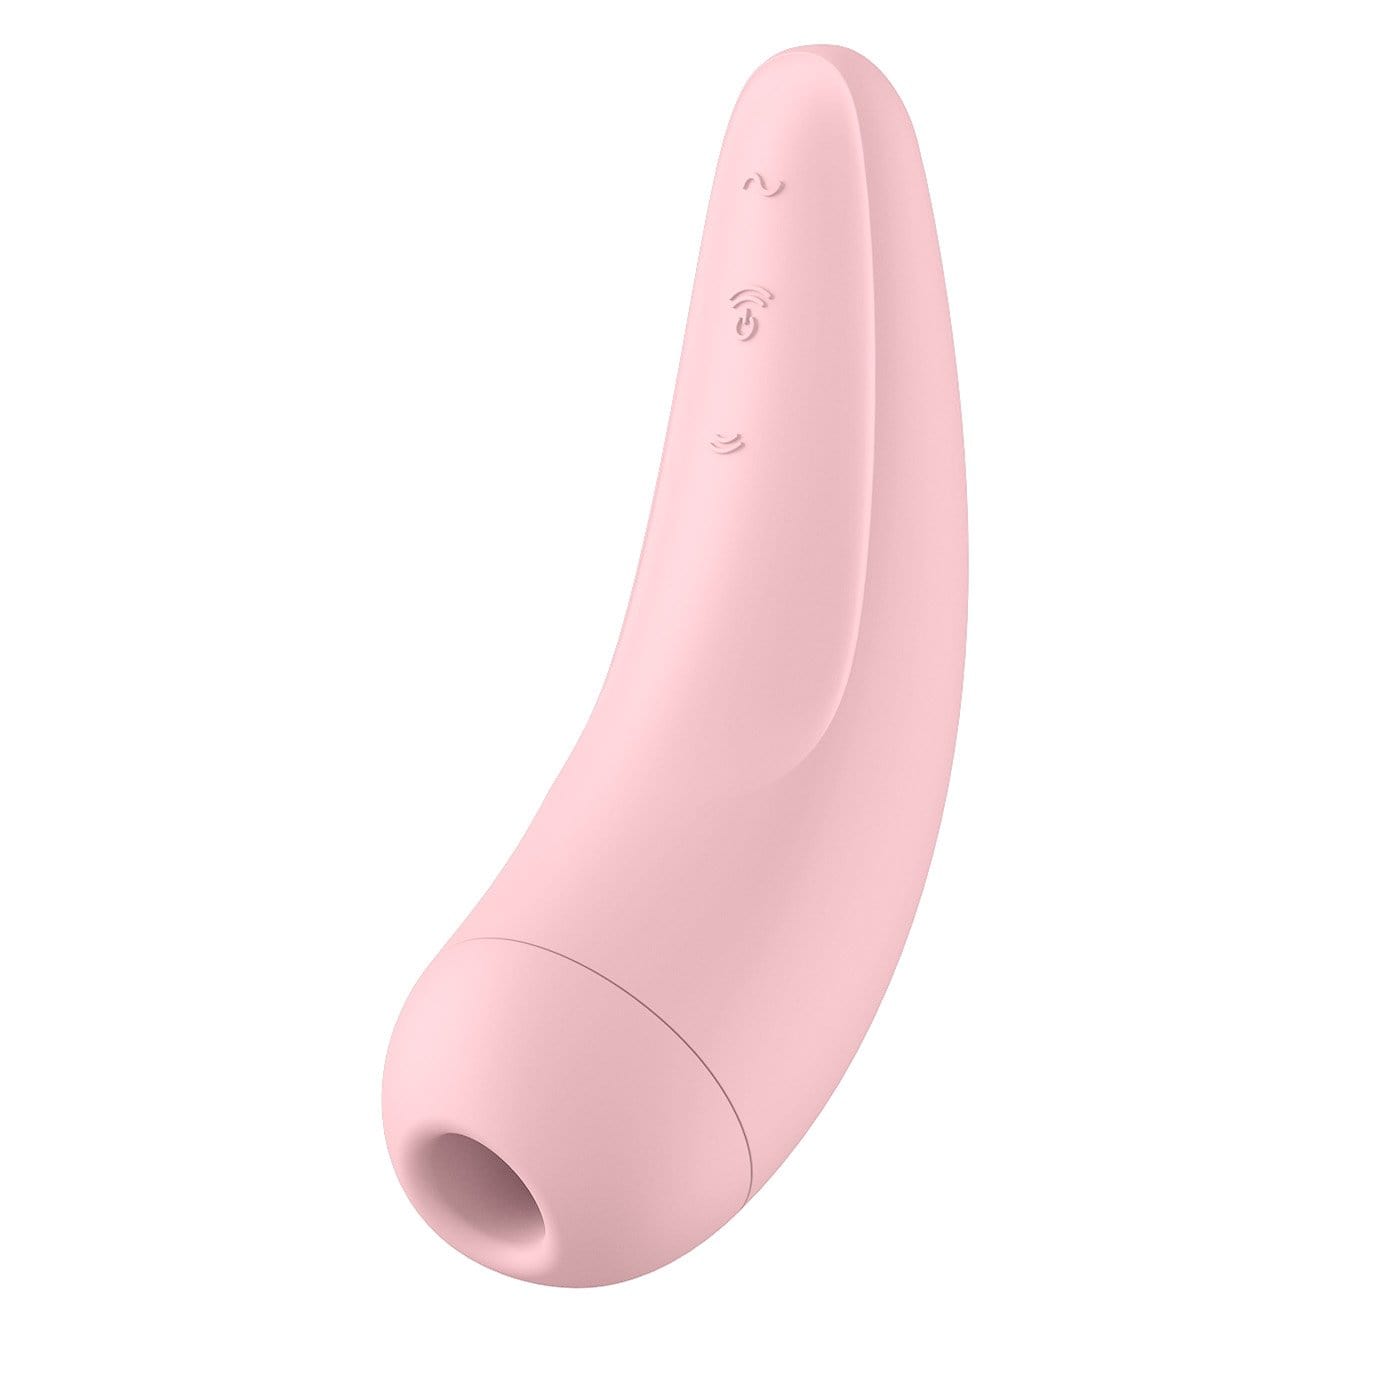 Satisfyer - Curvy 2+ App-Controlled Air Pulse Stimulator Vibrator (Pink) Clit Massager (Vibration) Rechargeable 289885180 CherryAffairs